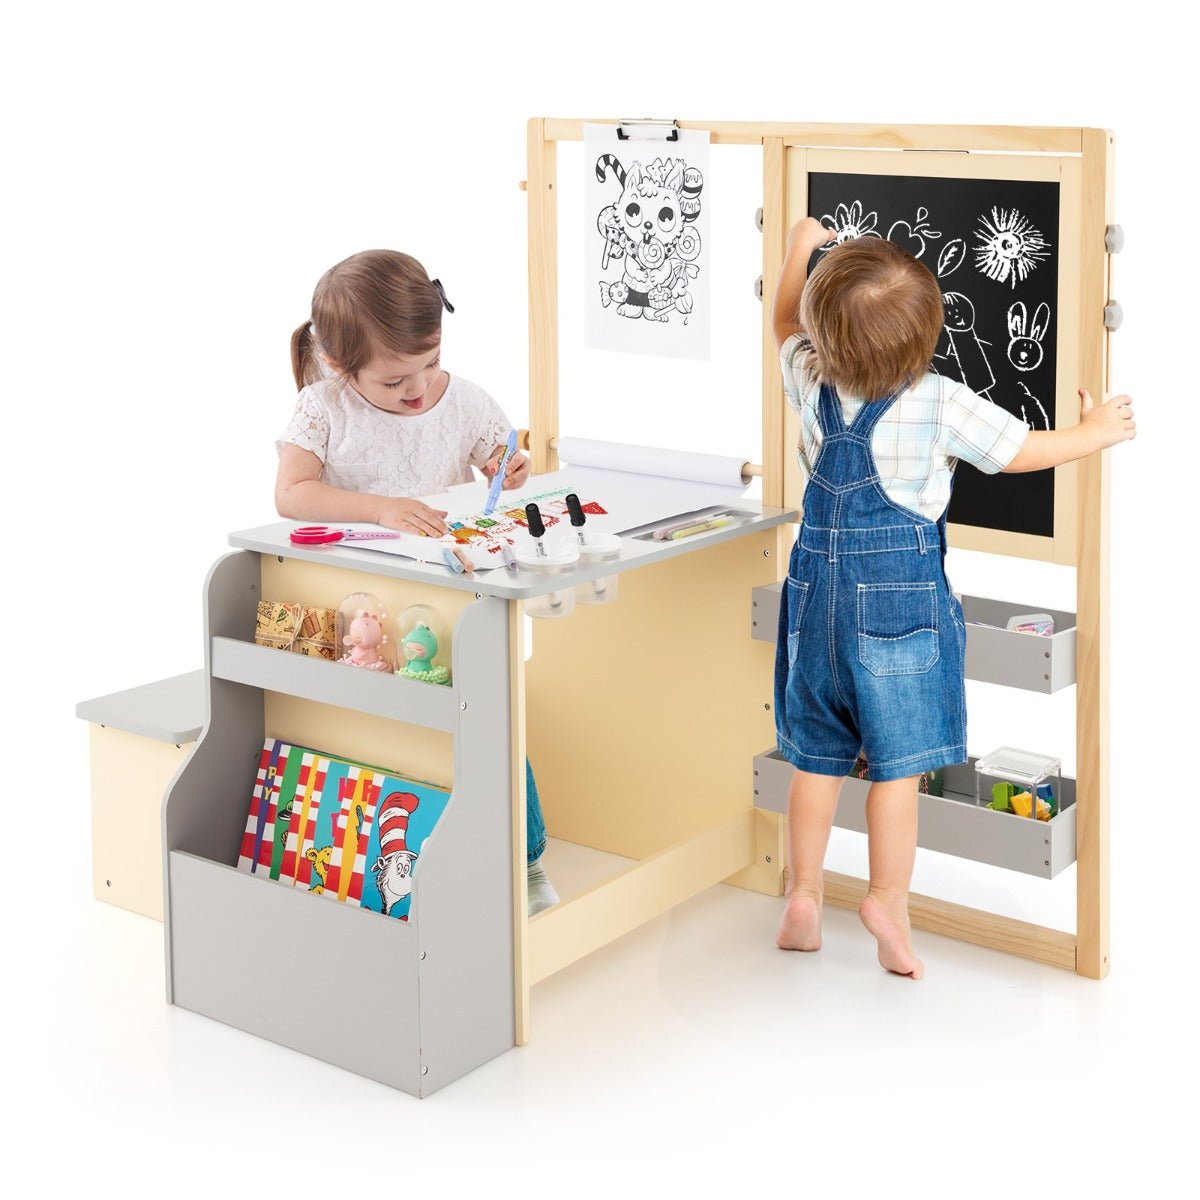 Quality and Creativity Combined: Grey Kids Art Table Set